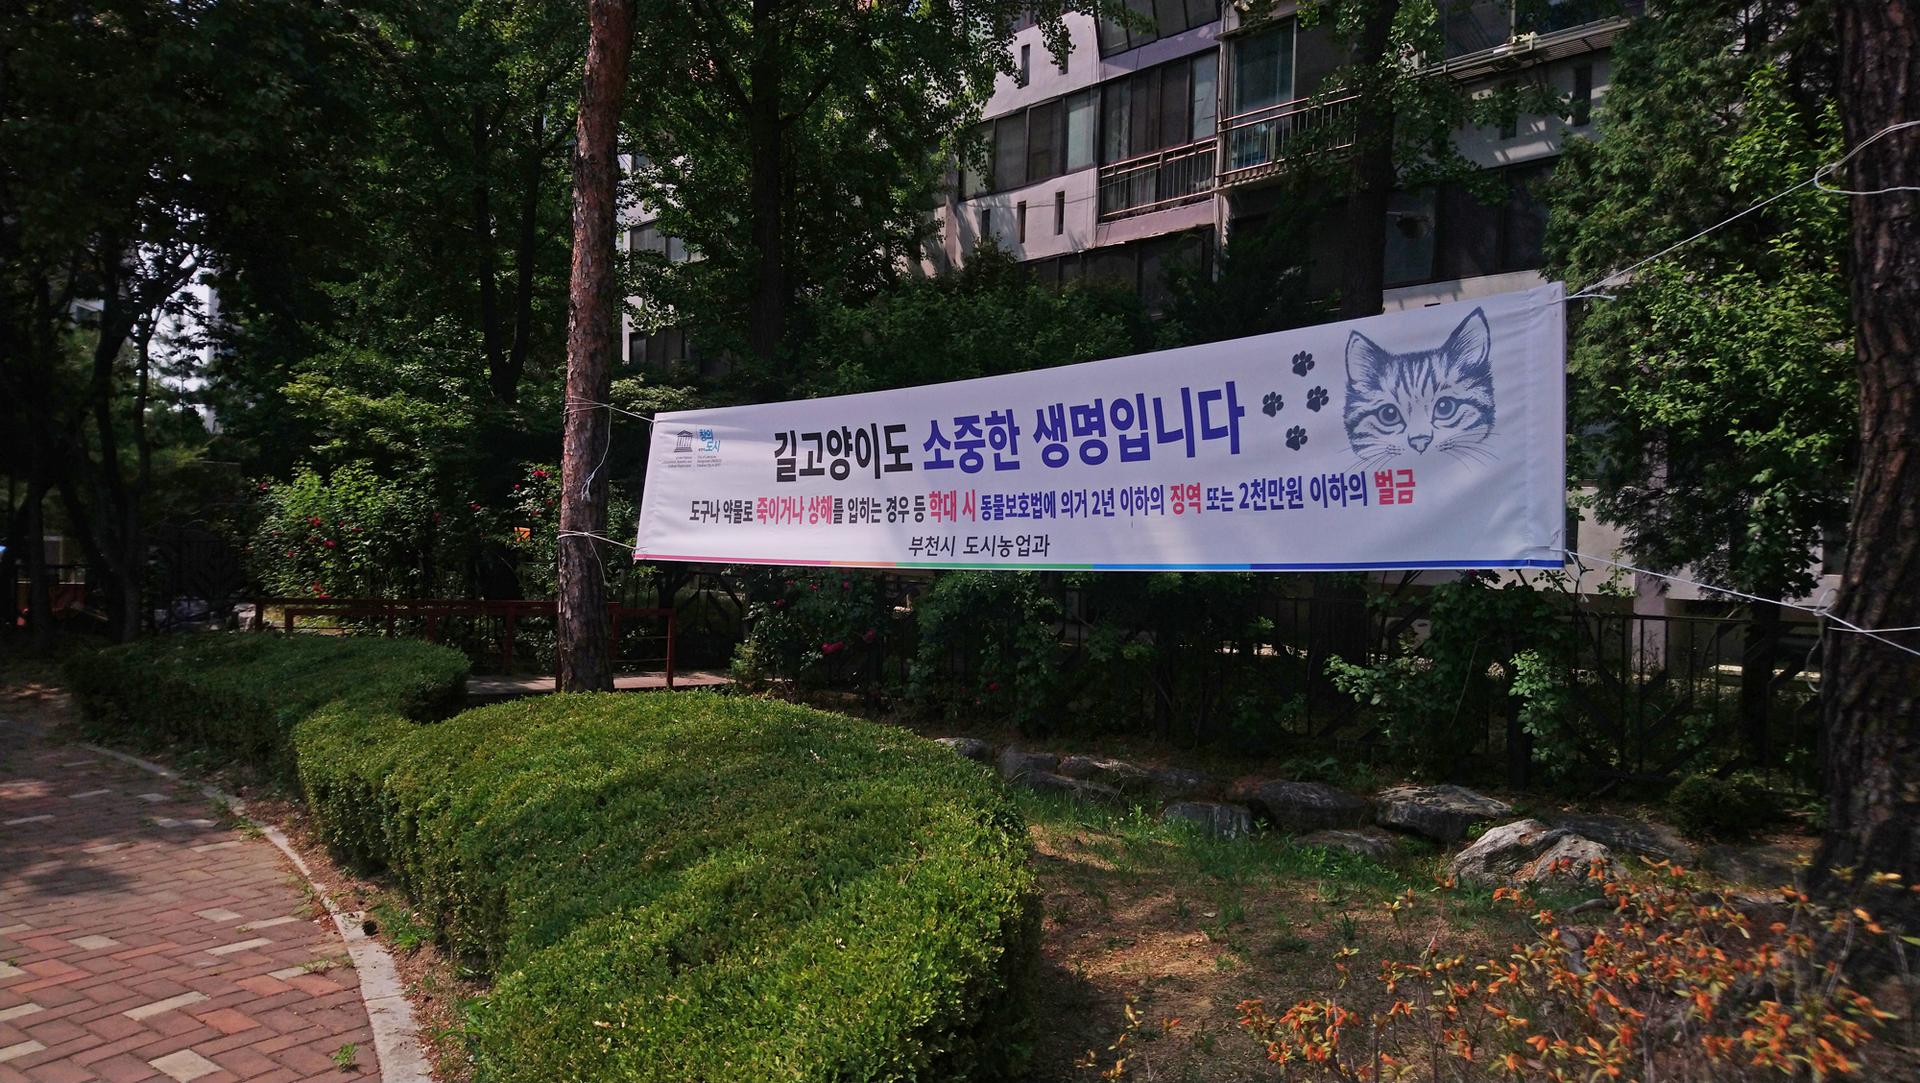 banner with cat face and Korean lettering promoting cat coexistence